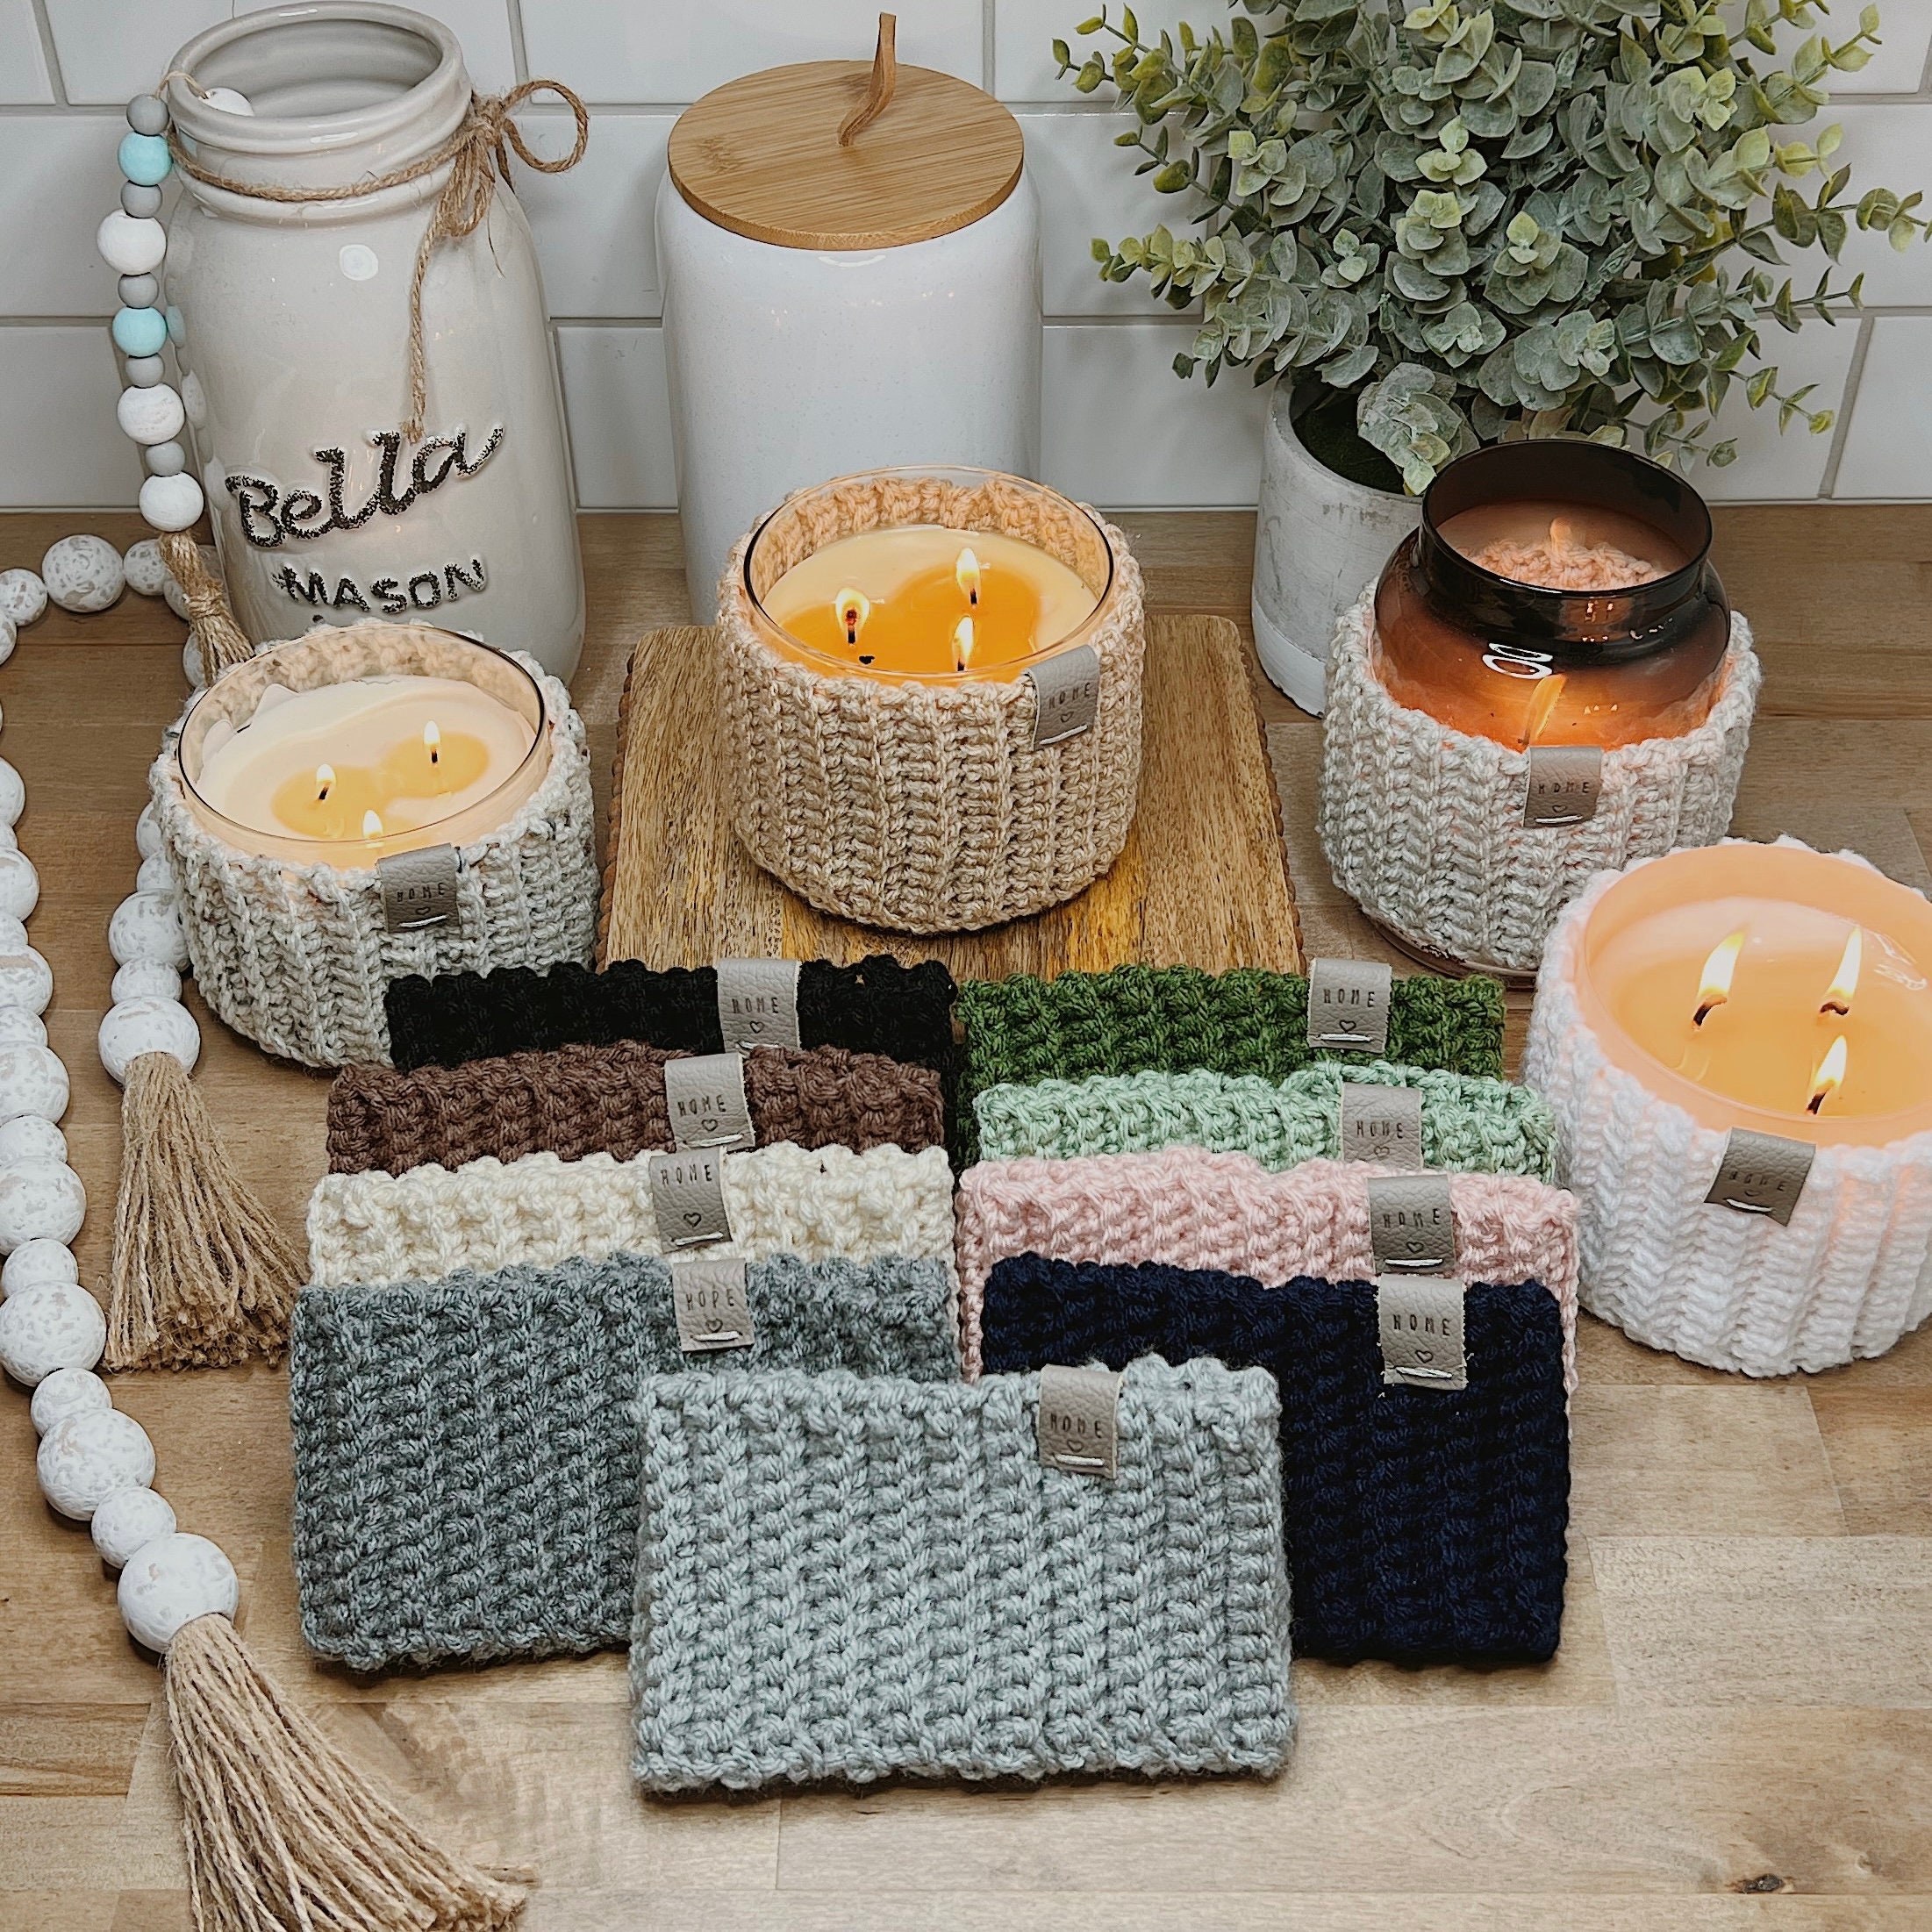  YouNique Designs Candle Gifts for Crocheters 8oz